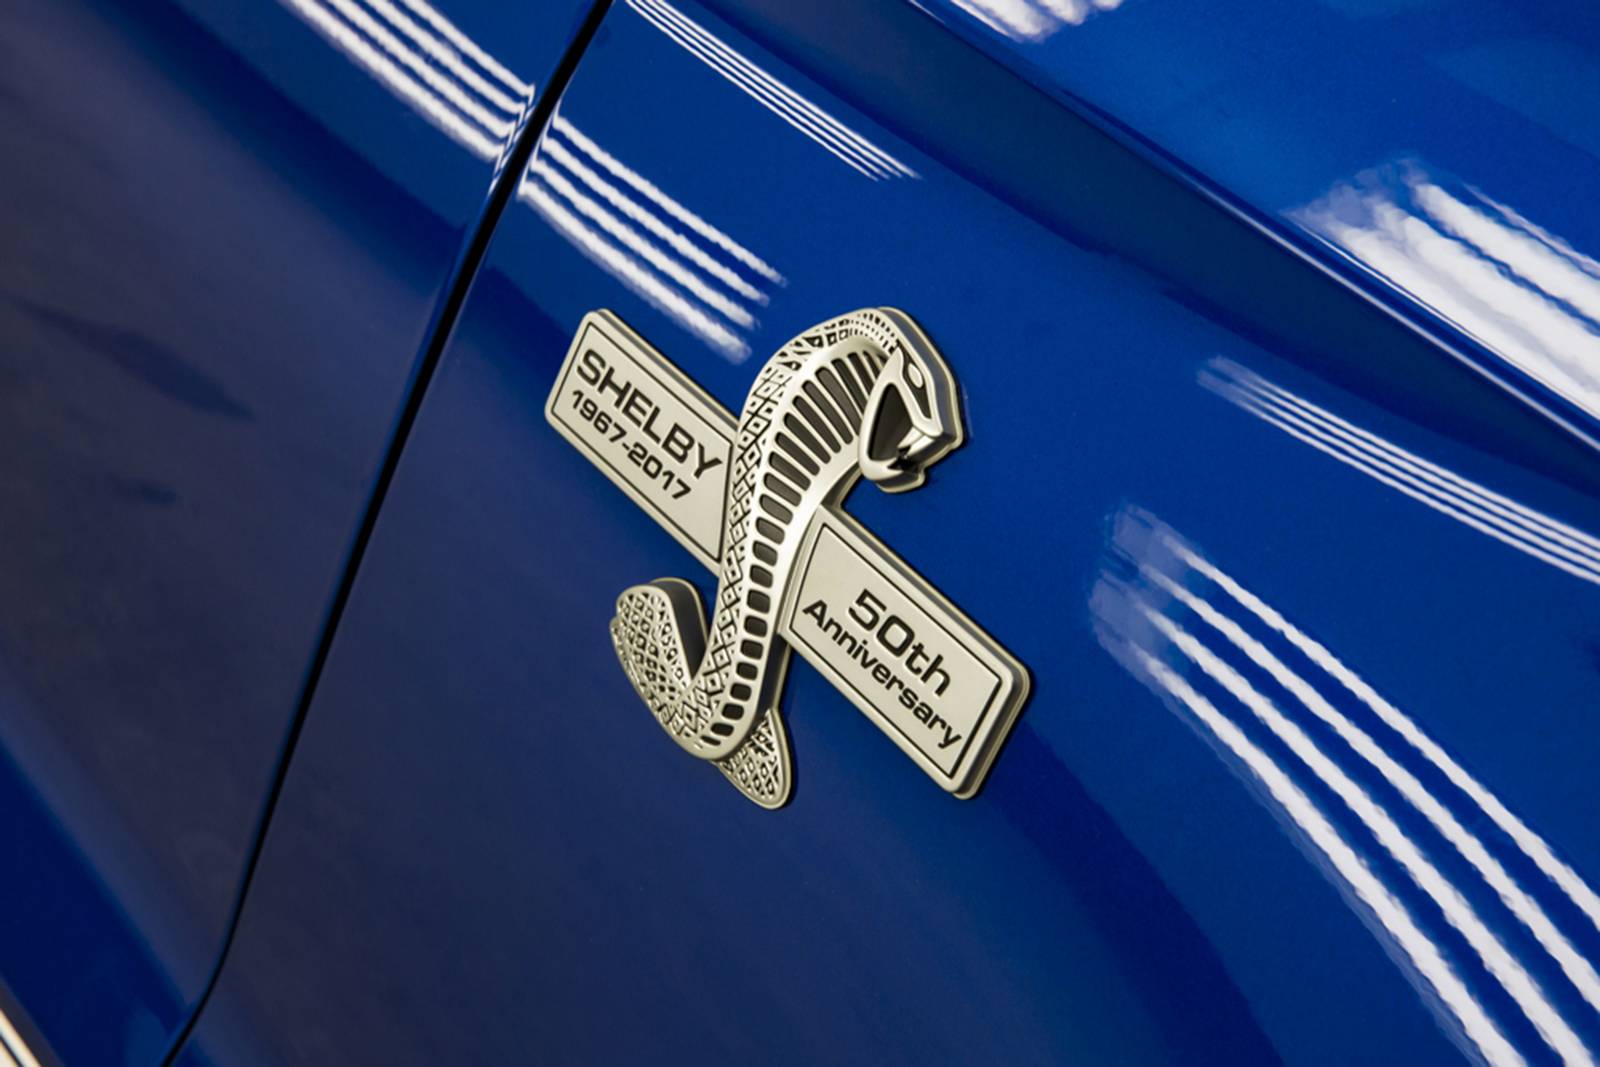 750 л.с. Shelby Mustang Super Snake 50th Anniversary